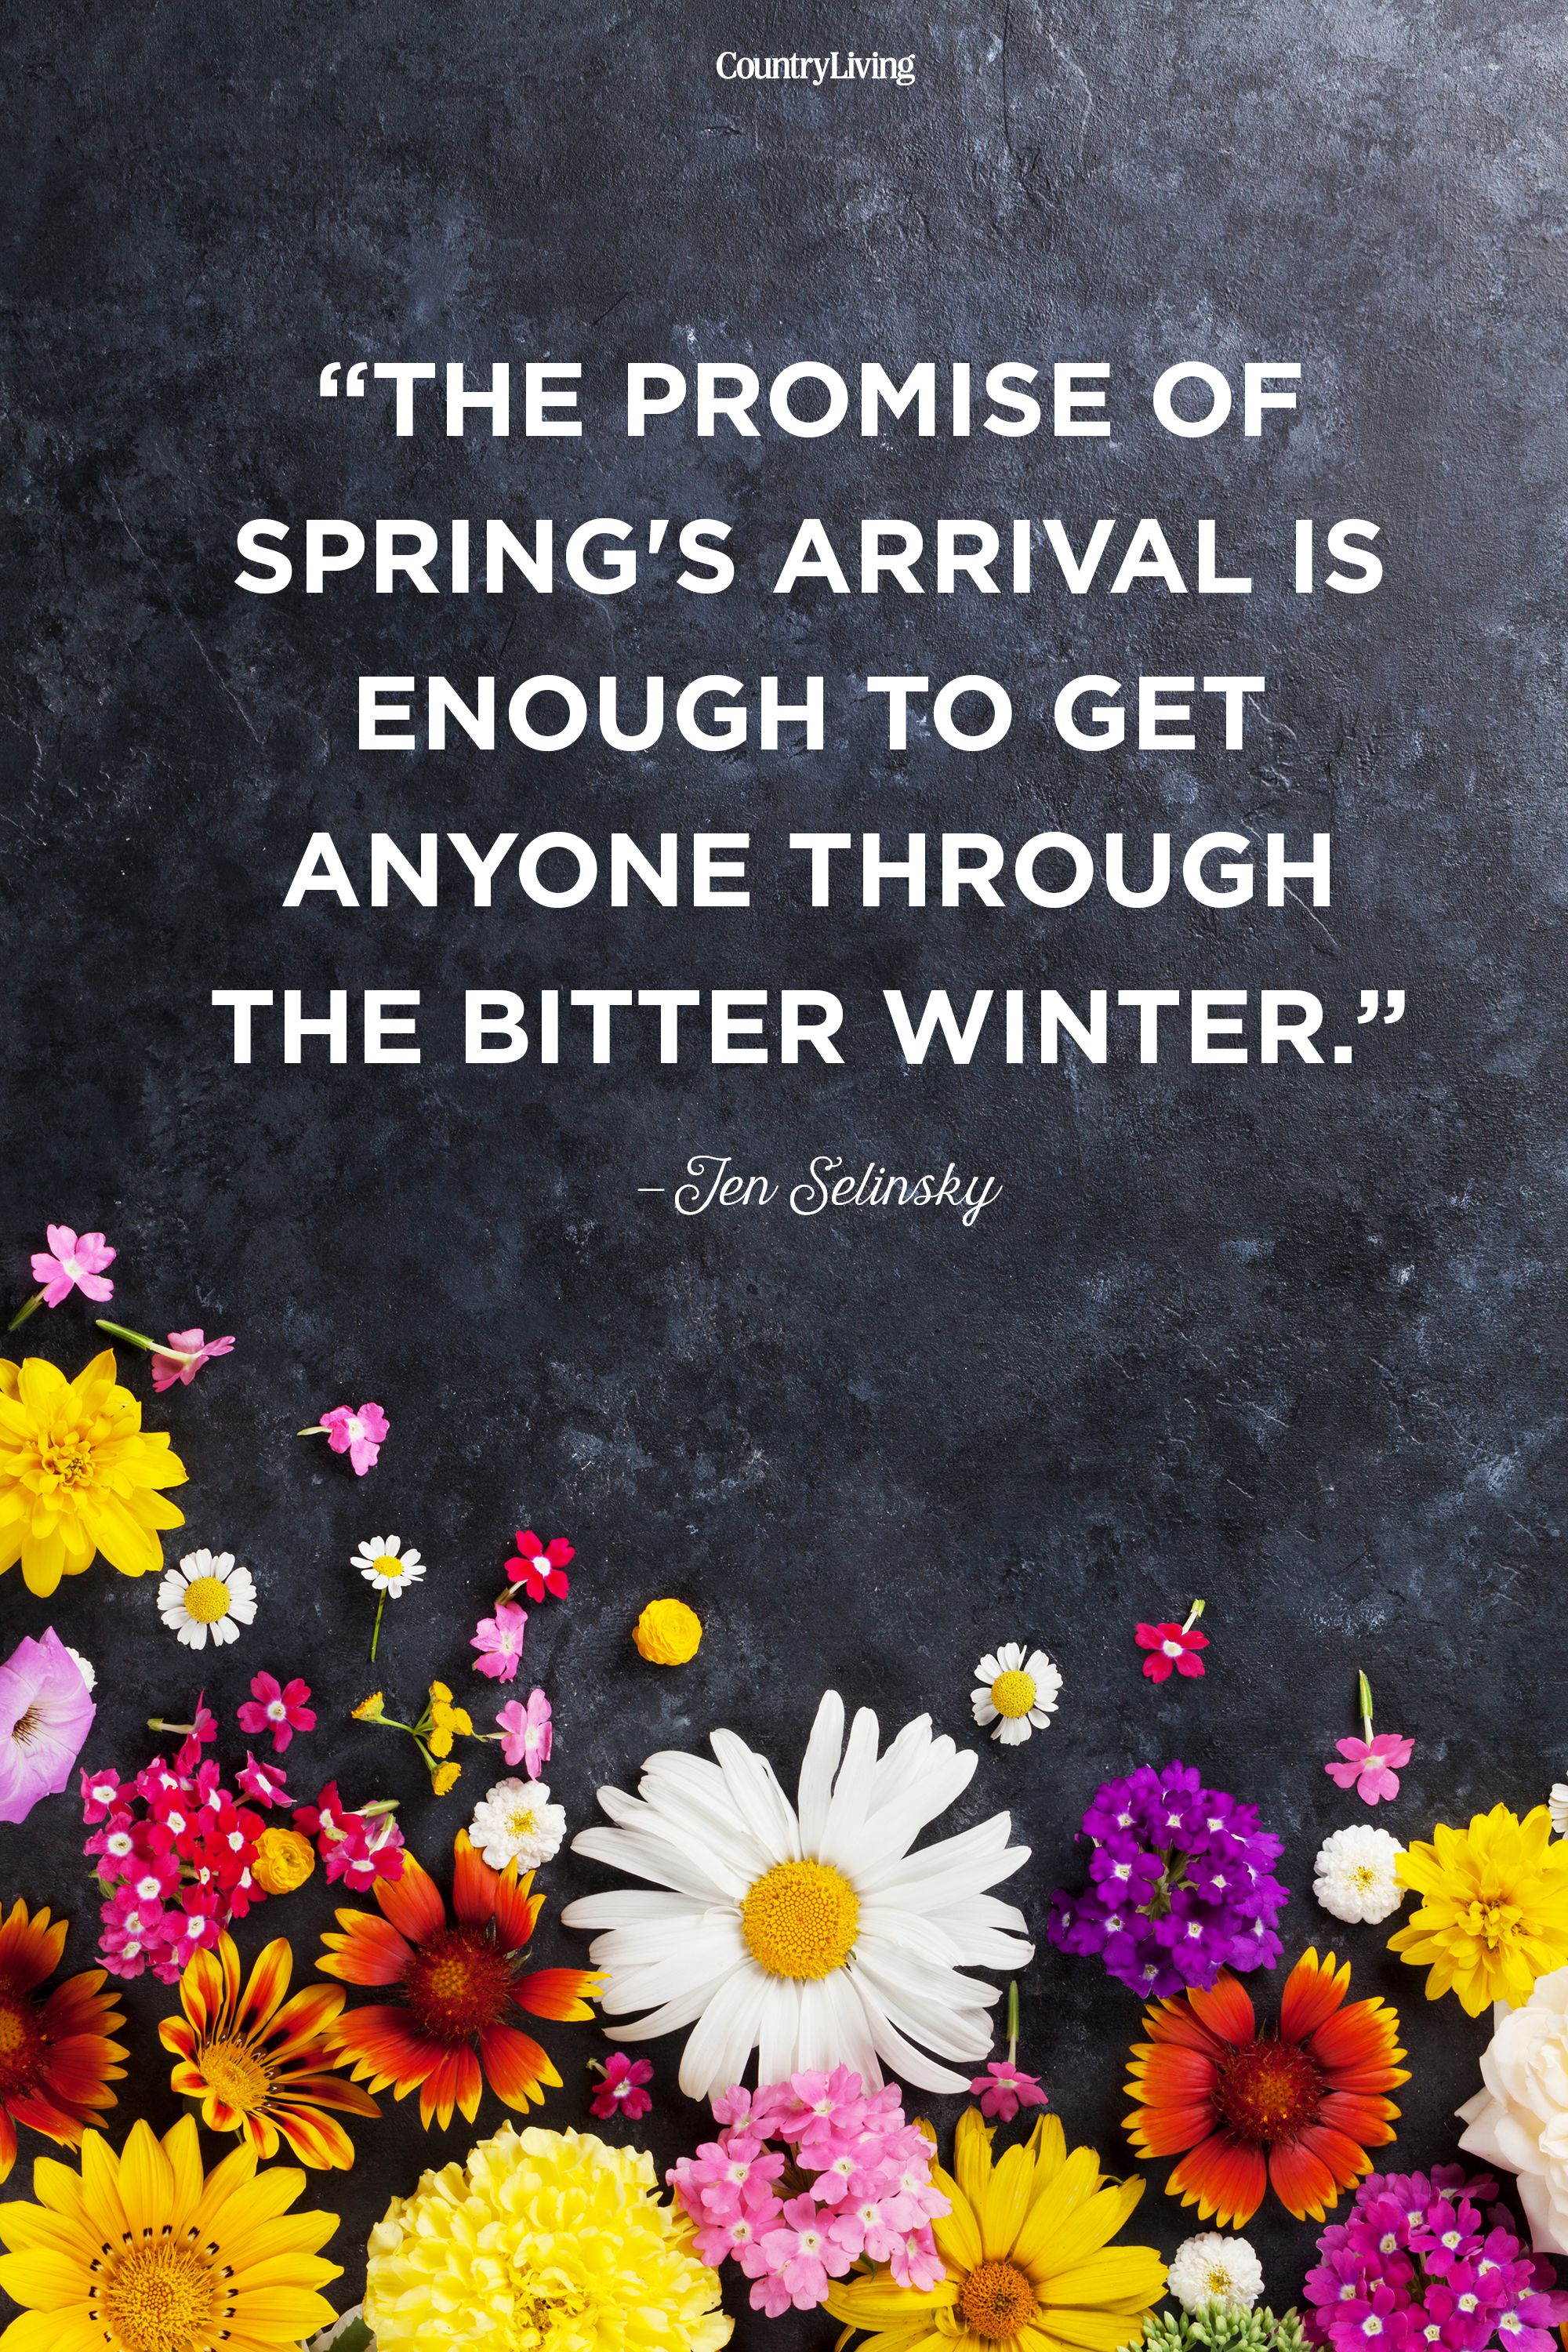 20 Happy Spring Quotes - Motivational Sayings About Spring